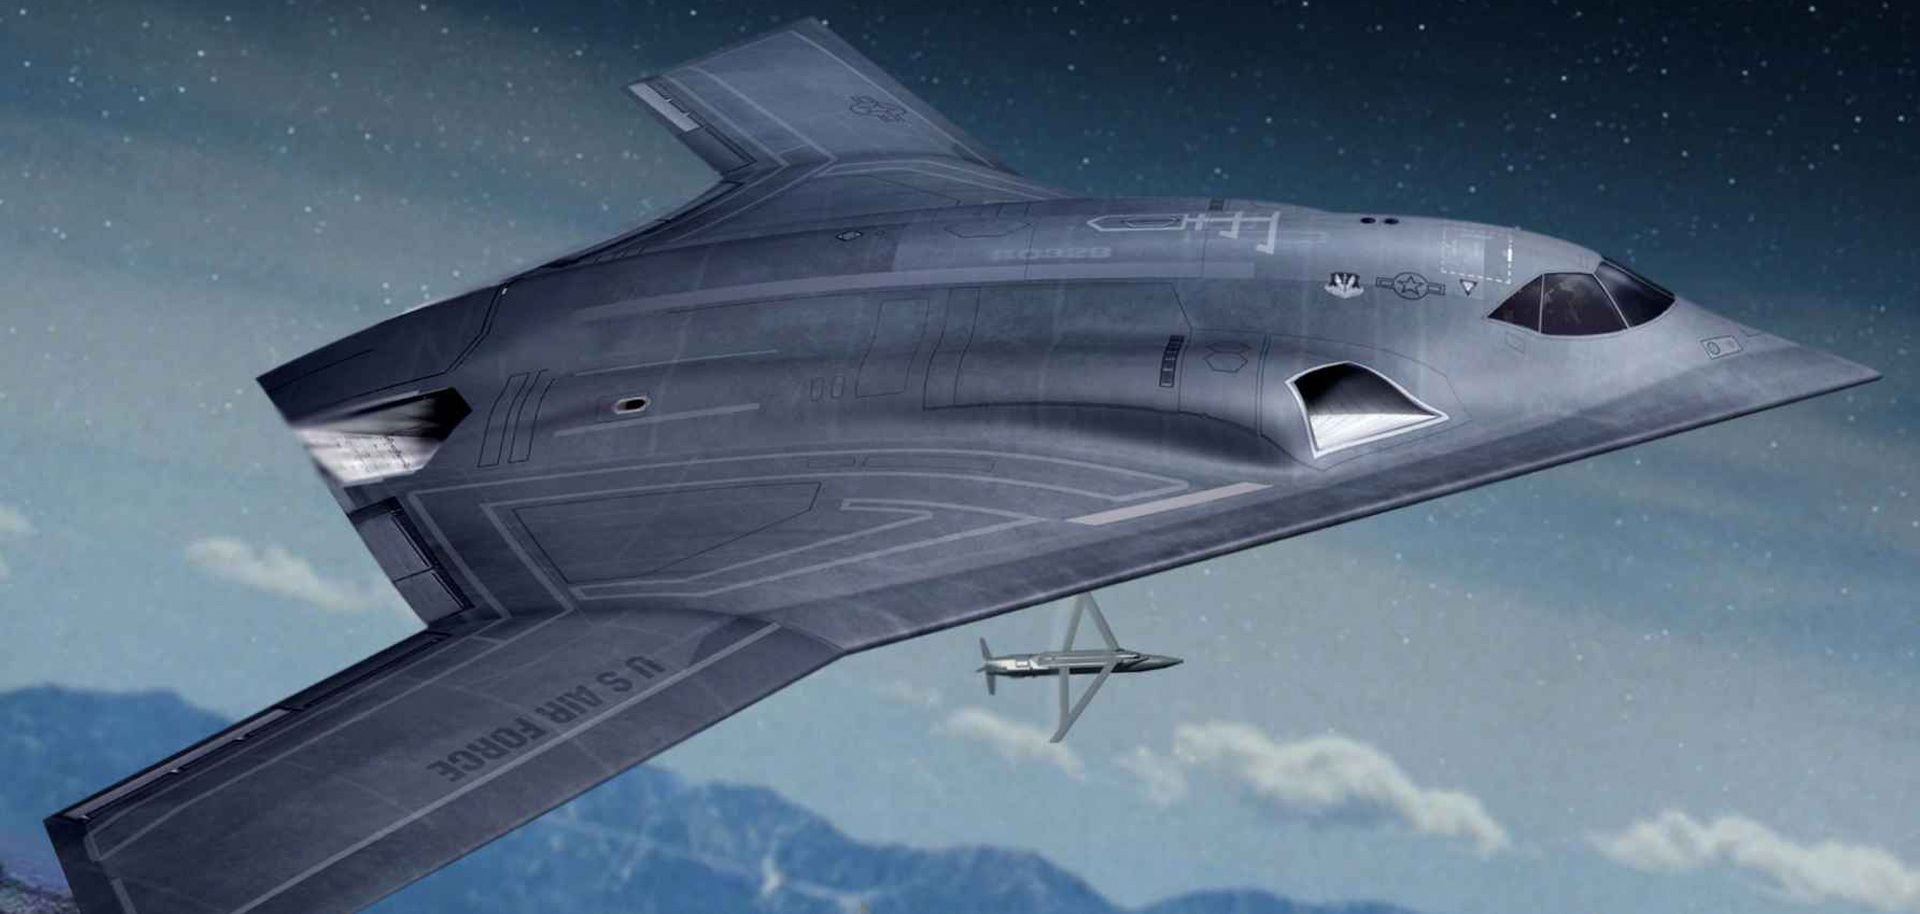 A concept drawing of the next-generation long-range strike bomber. With its latest generation of bomber aircraft, the United States hopes to secure its advantage in conventional and asymmetric warfare for years to come. 